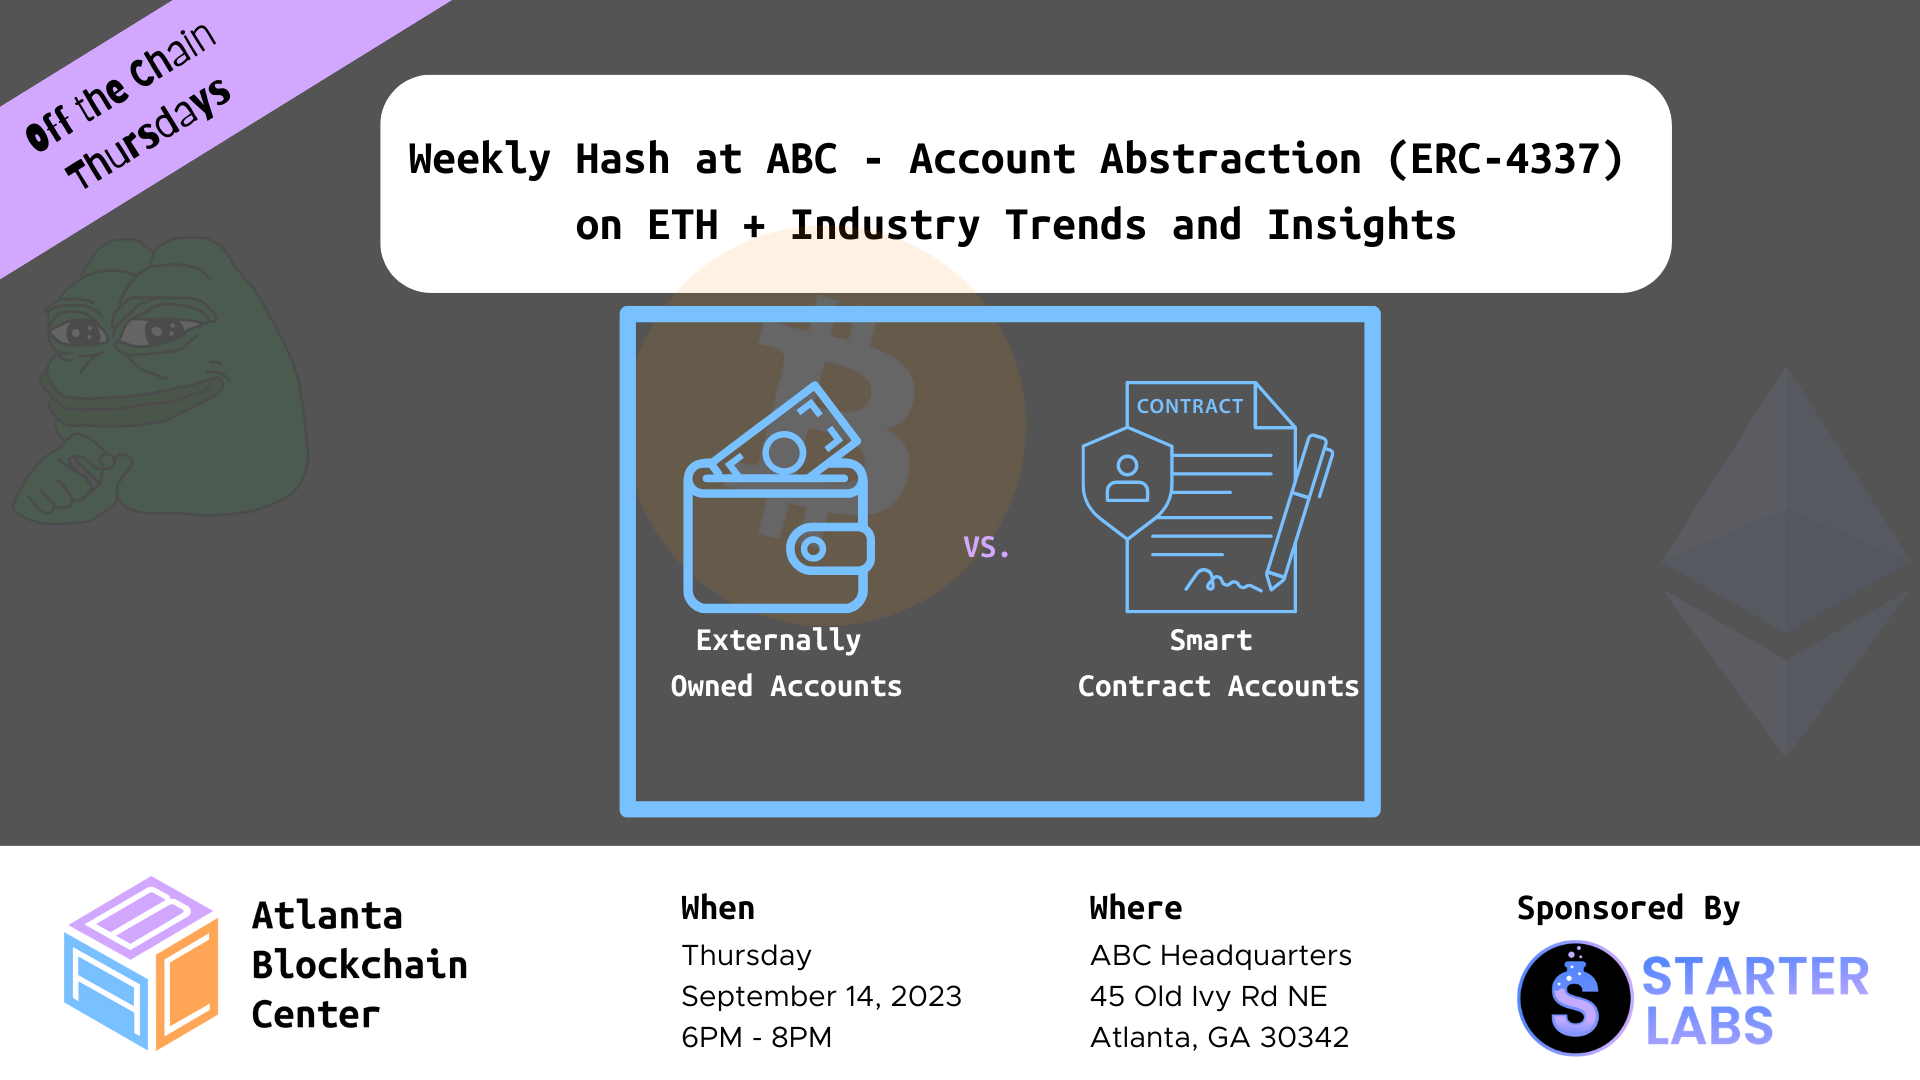 Weekly Hash at ABC – ETH Account Abstraction (ERC-4337) + Industry Trends